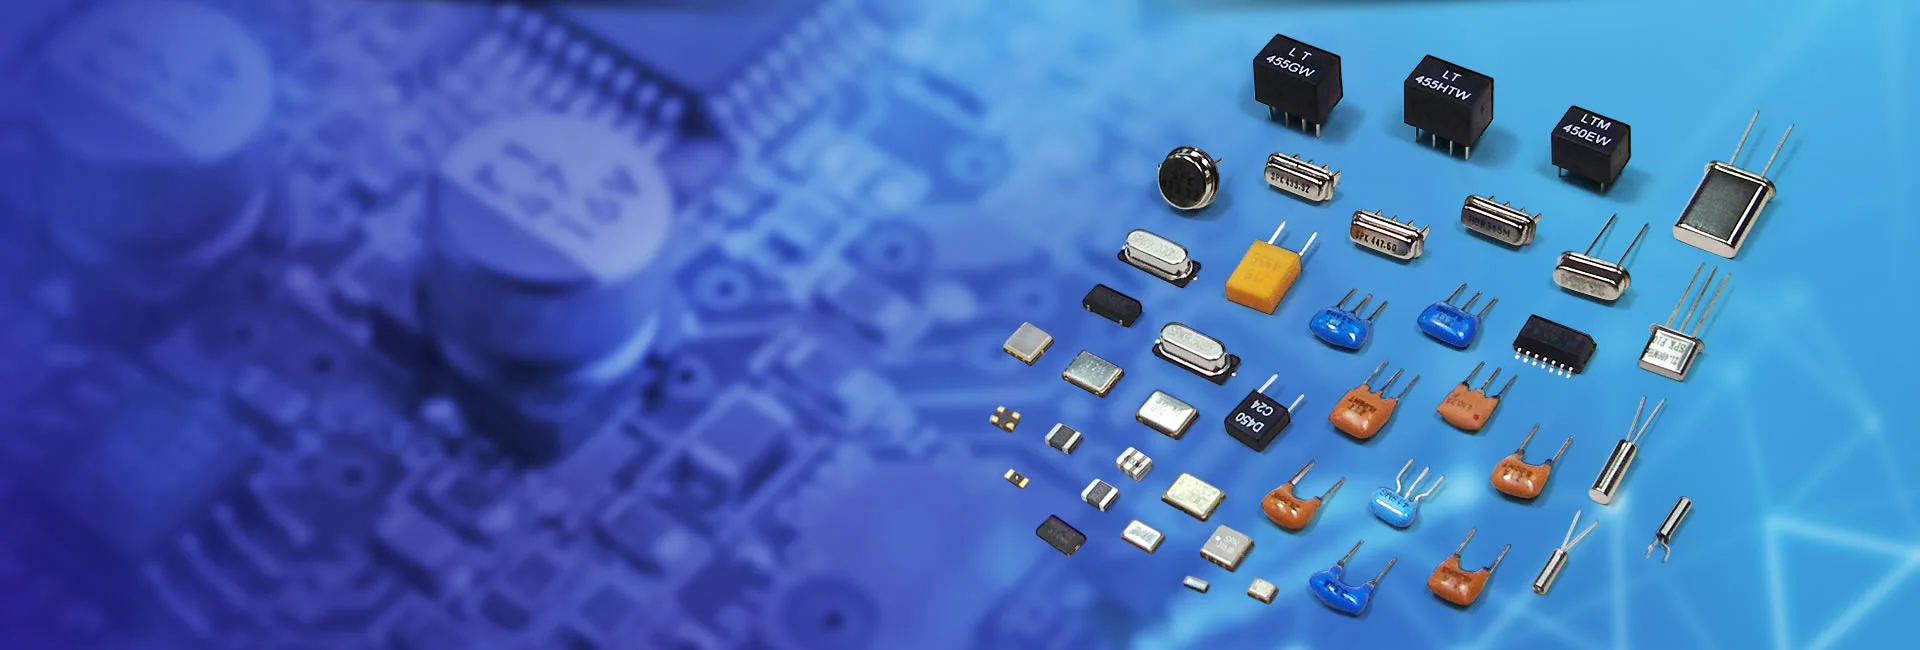 OEM/ ODM services for electronic components